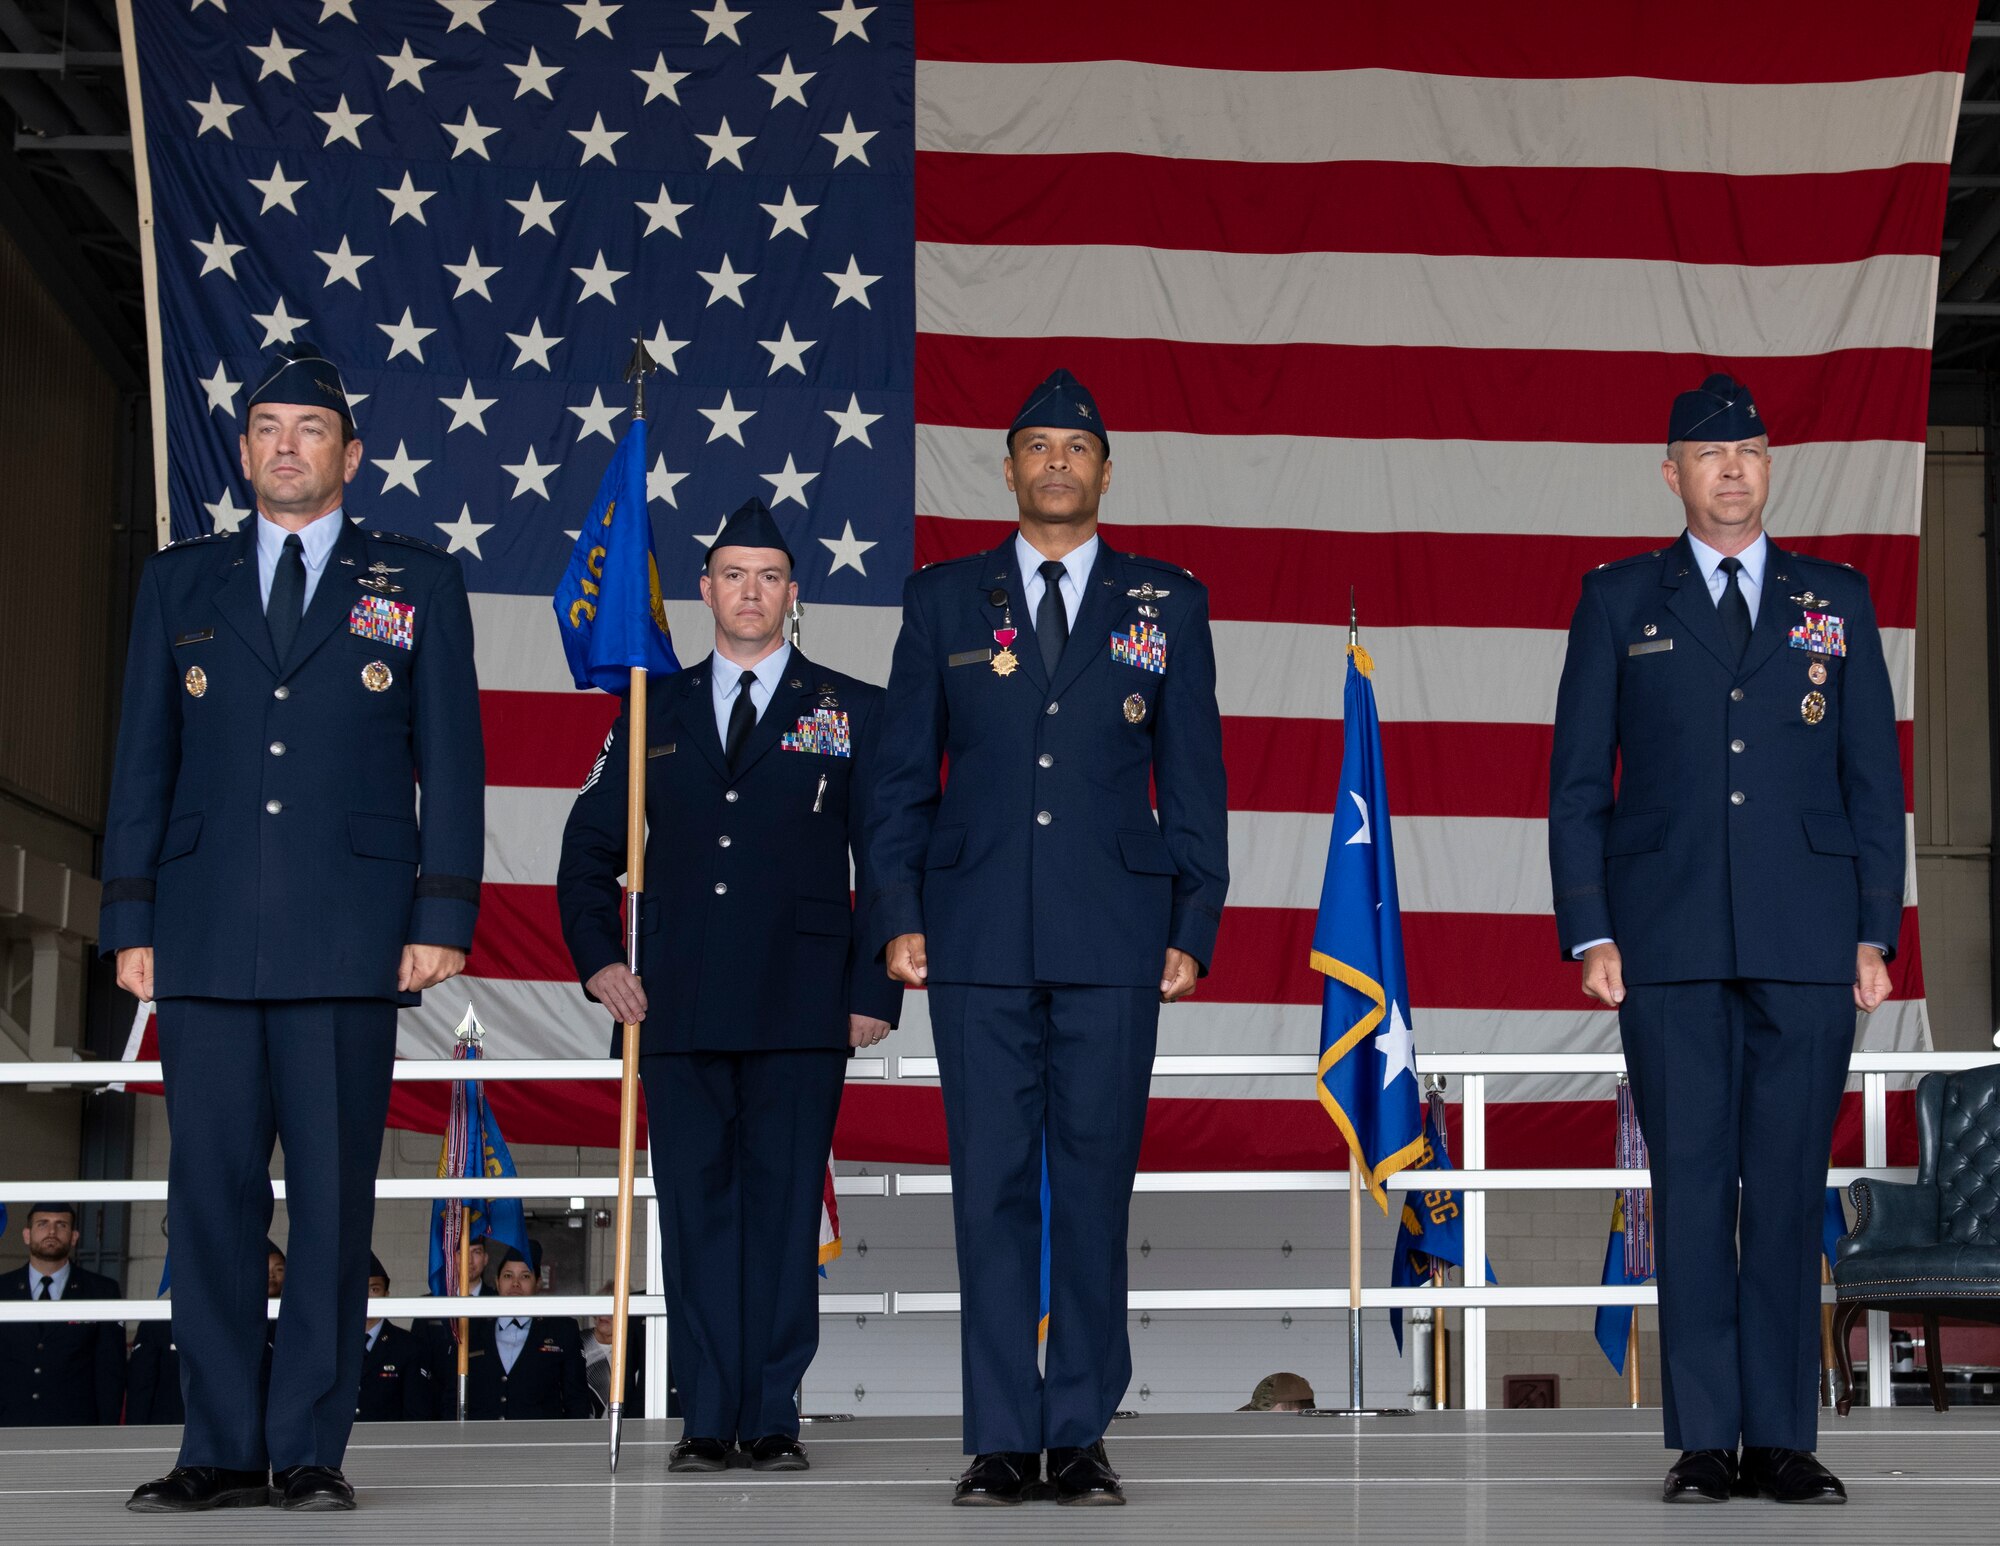 Four men in blue suits stand at attention in front of an American flag.